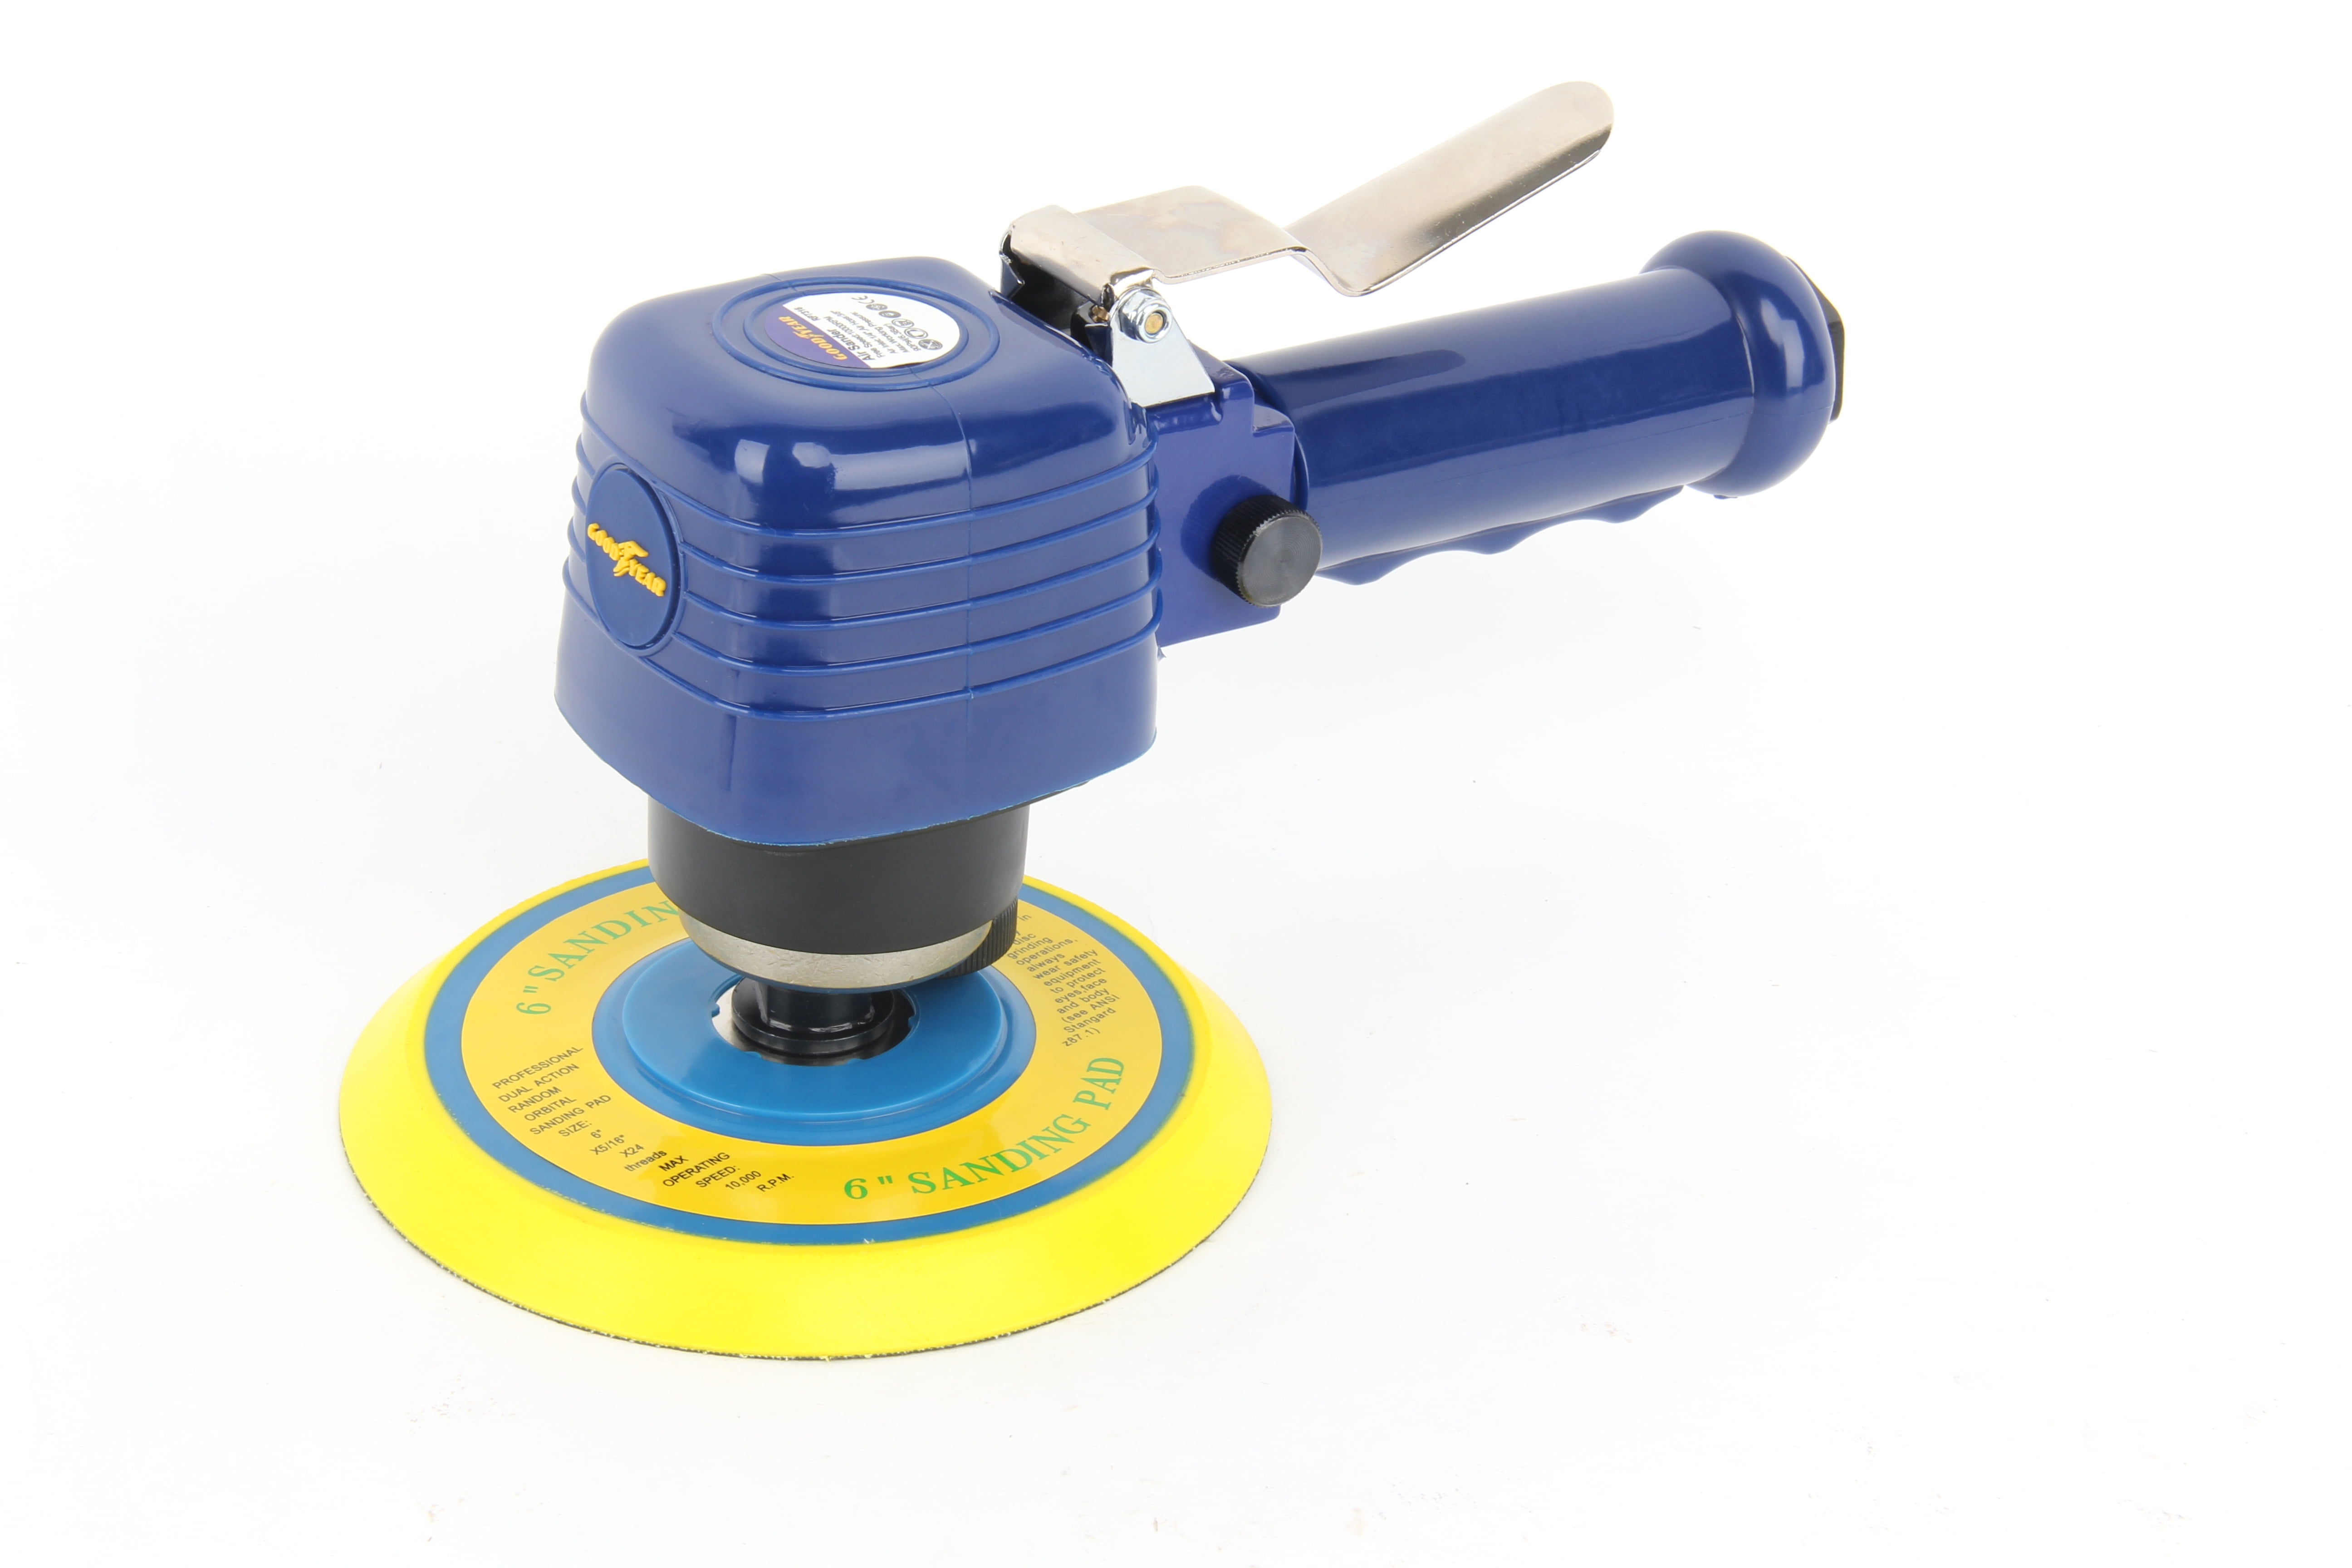 Goodyear 6-inch Dual Action Sander 10,000 RPM (RP7316) Light Weight Air Tool